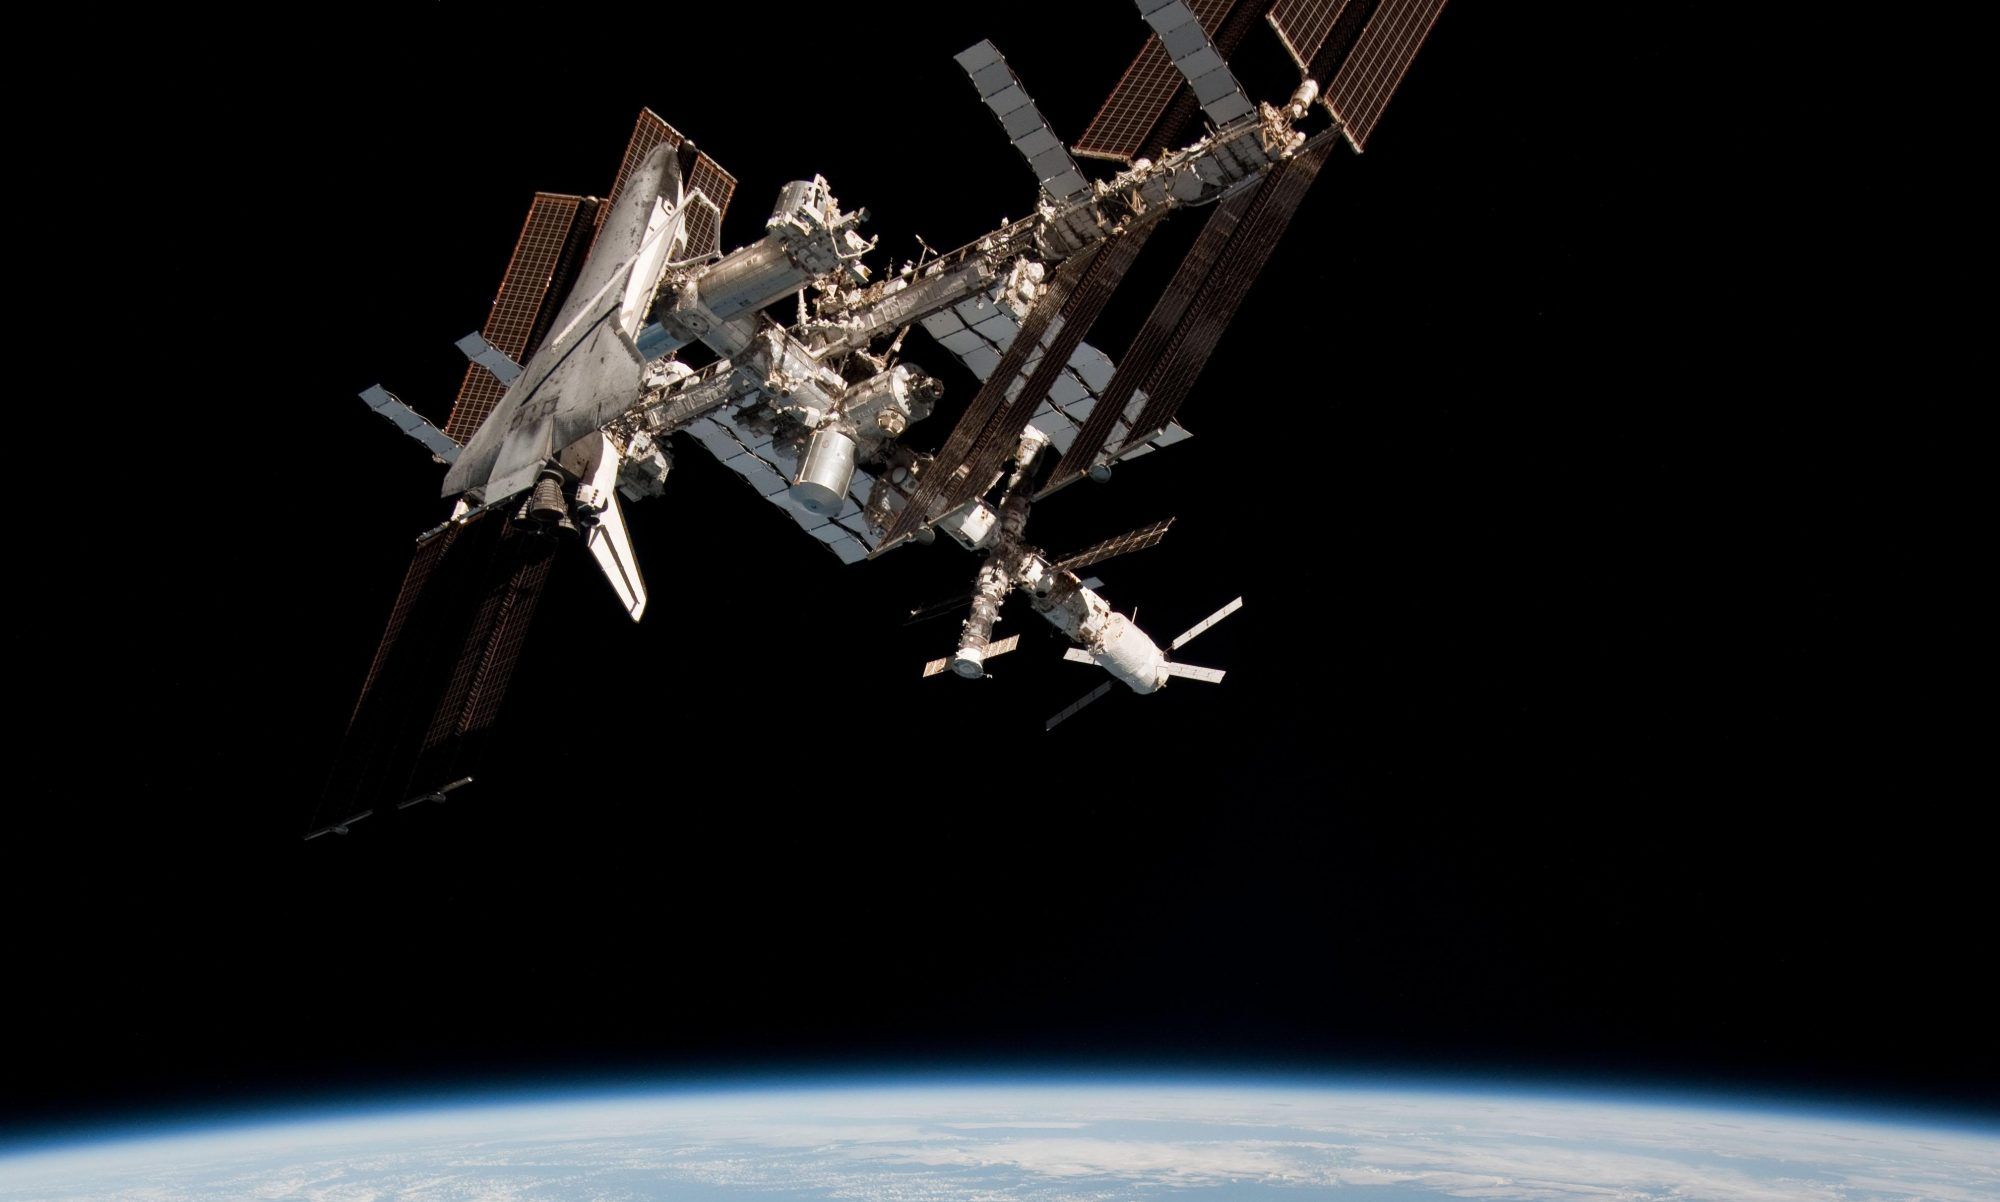 International Space Station pictured in orbit above Earth.